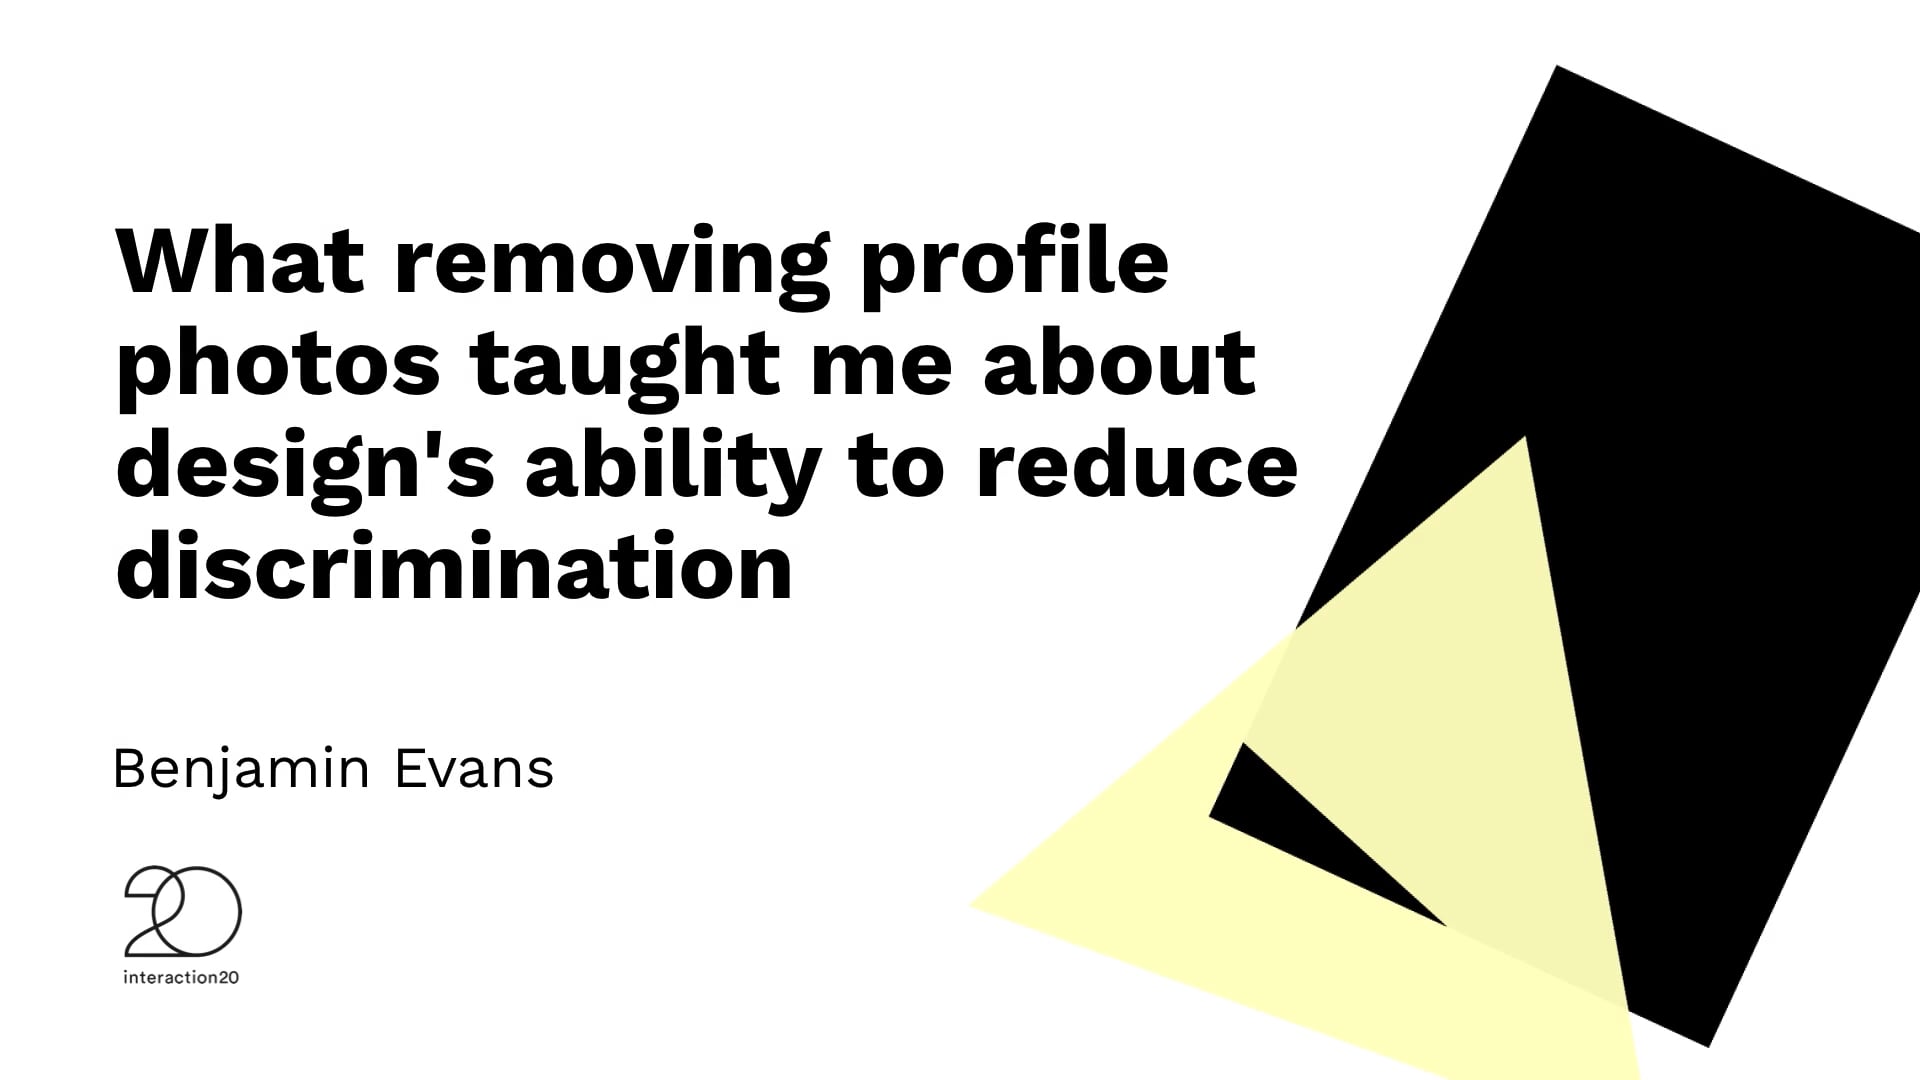 Negative space: What removing profile photos taught me about design’s ability to reduce discrimination